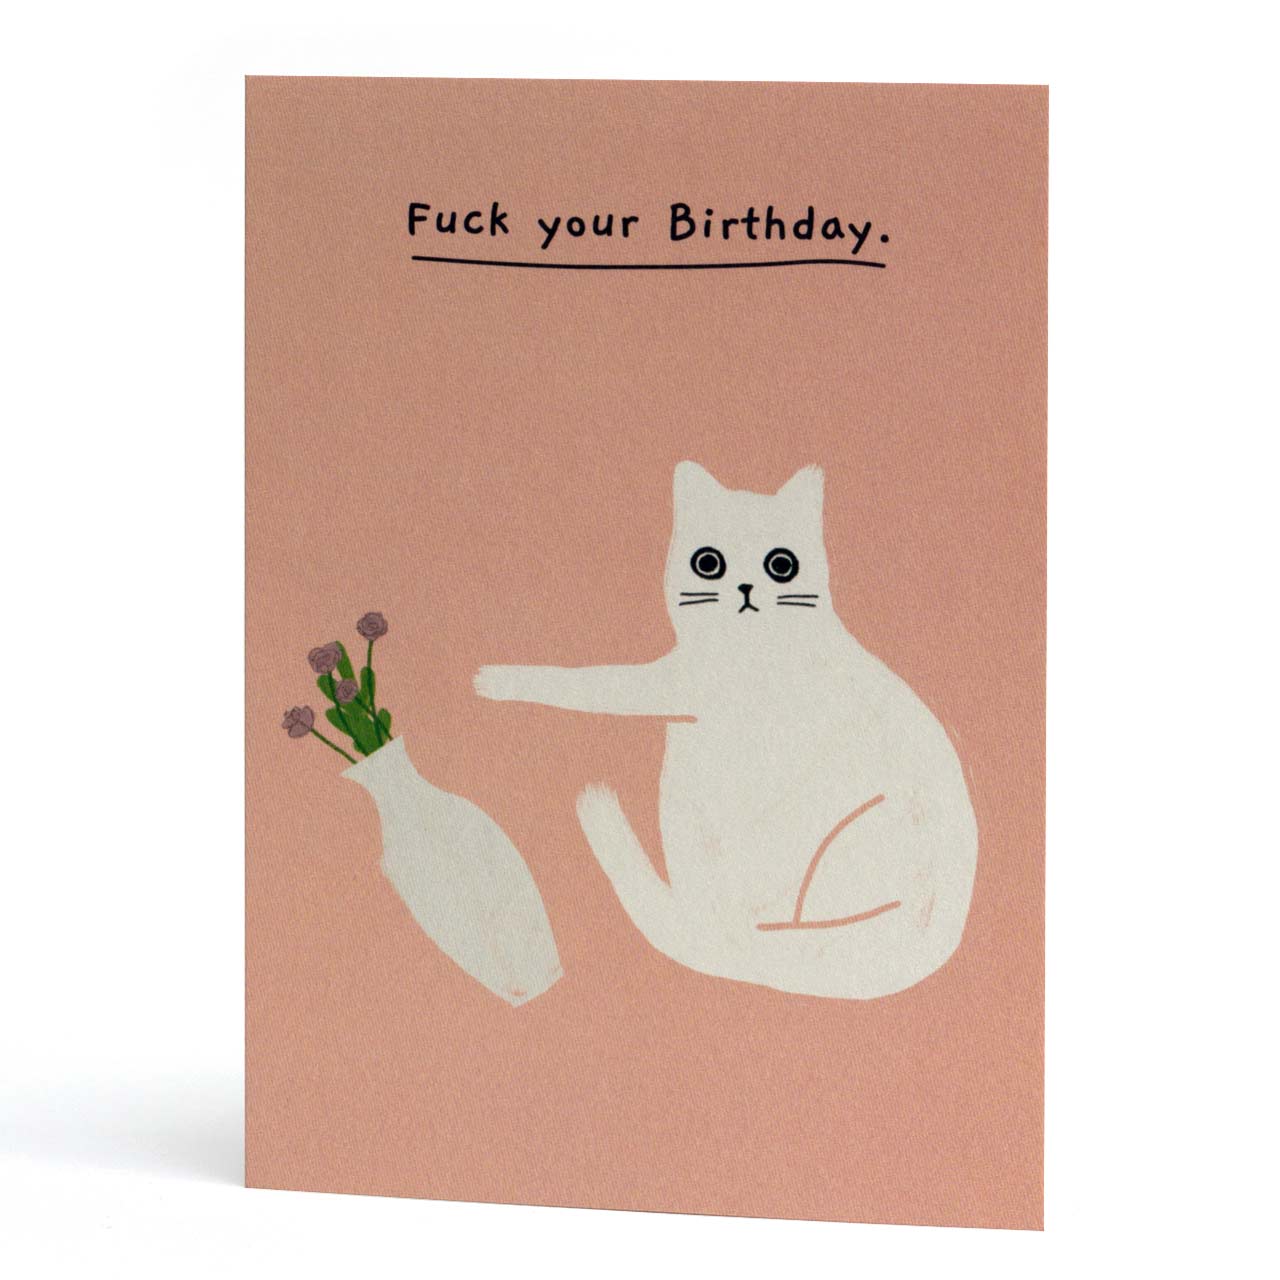 Fuck Your Birthday Greeting Card